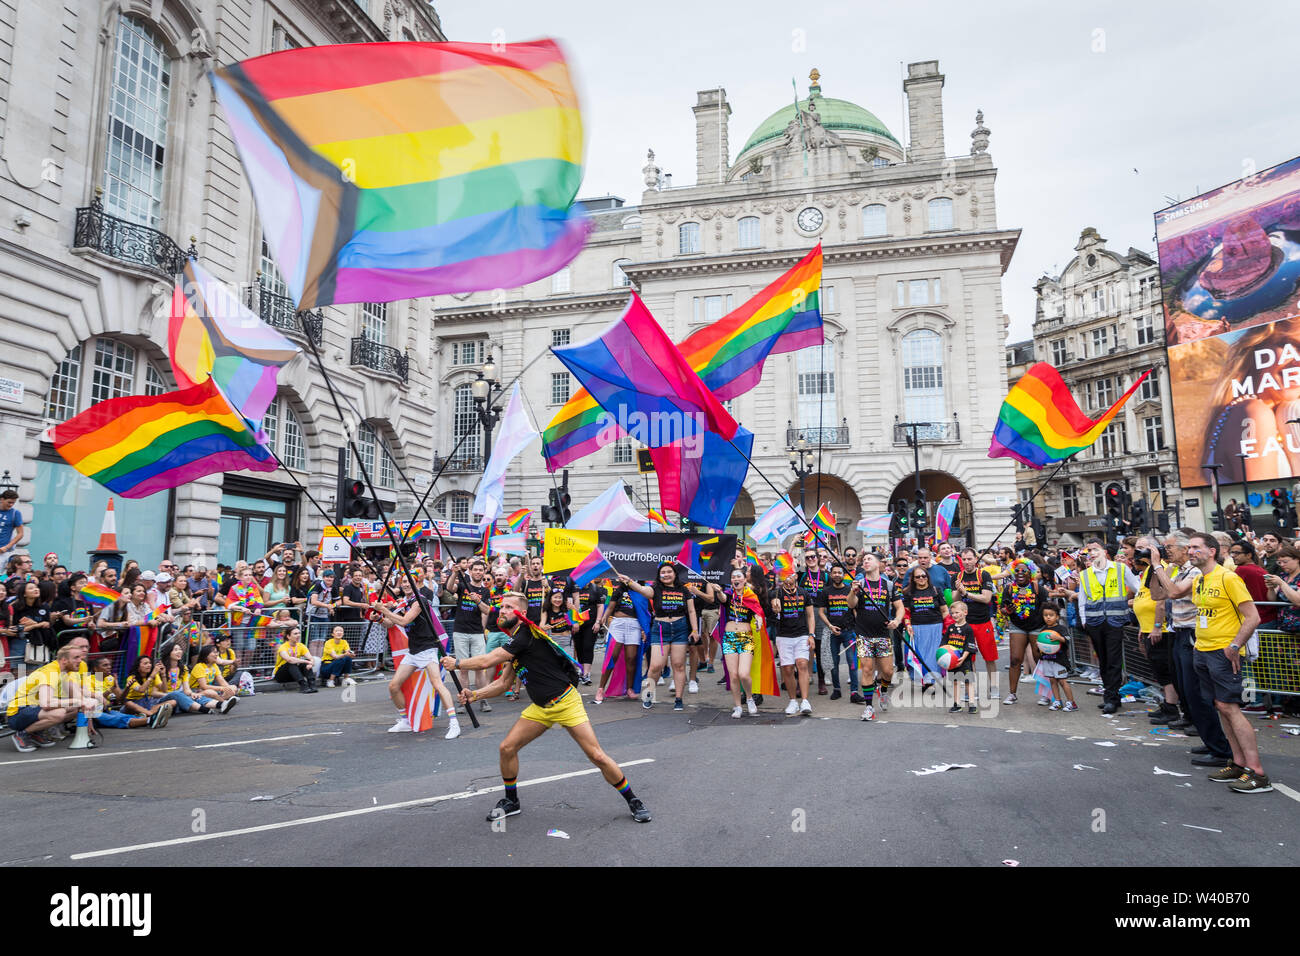 Revellers waving giant LGBT flags in Piccadilly Circus during the Pride parade Stock Photo